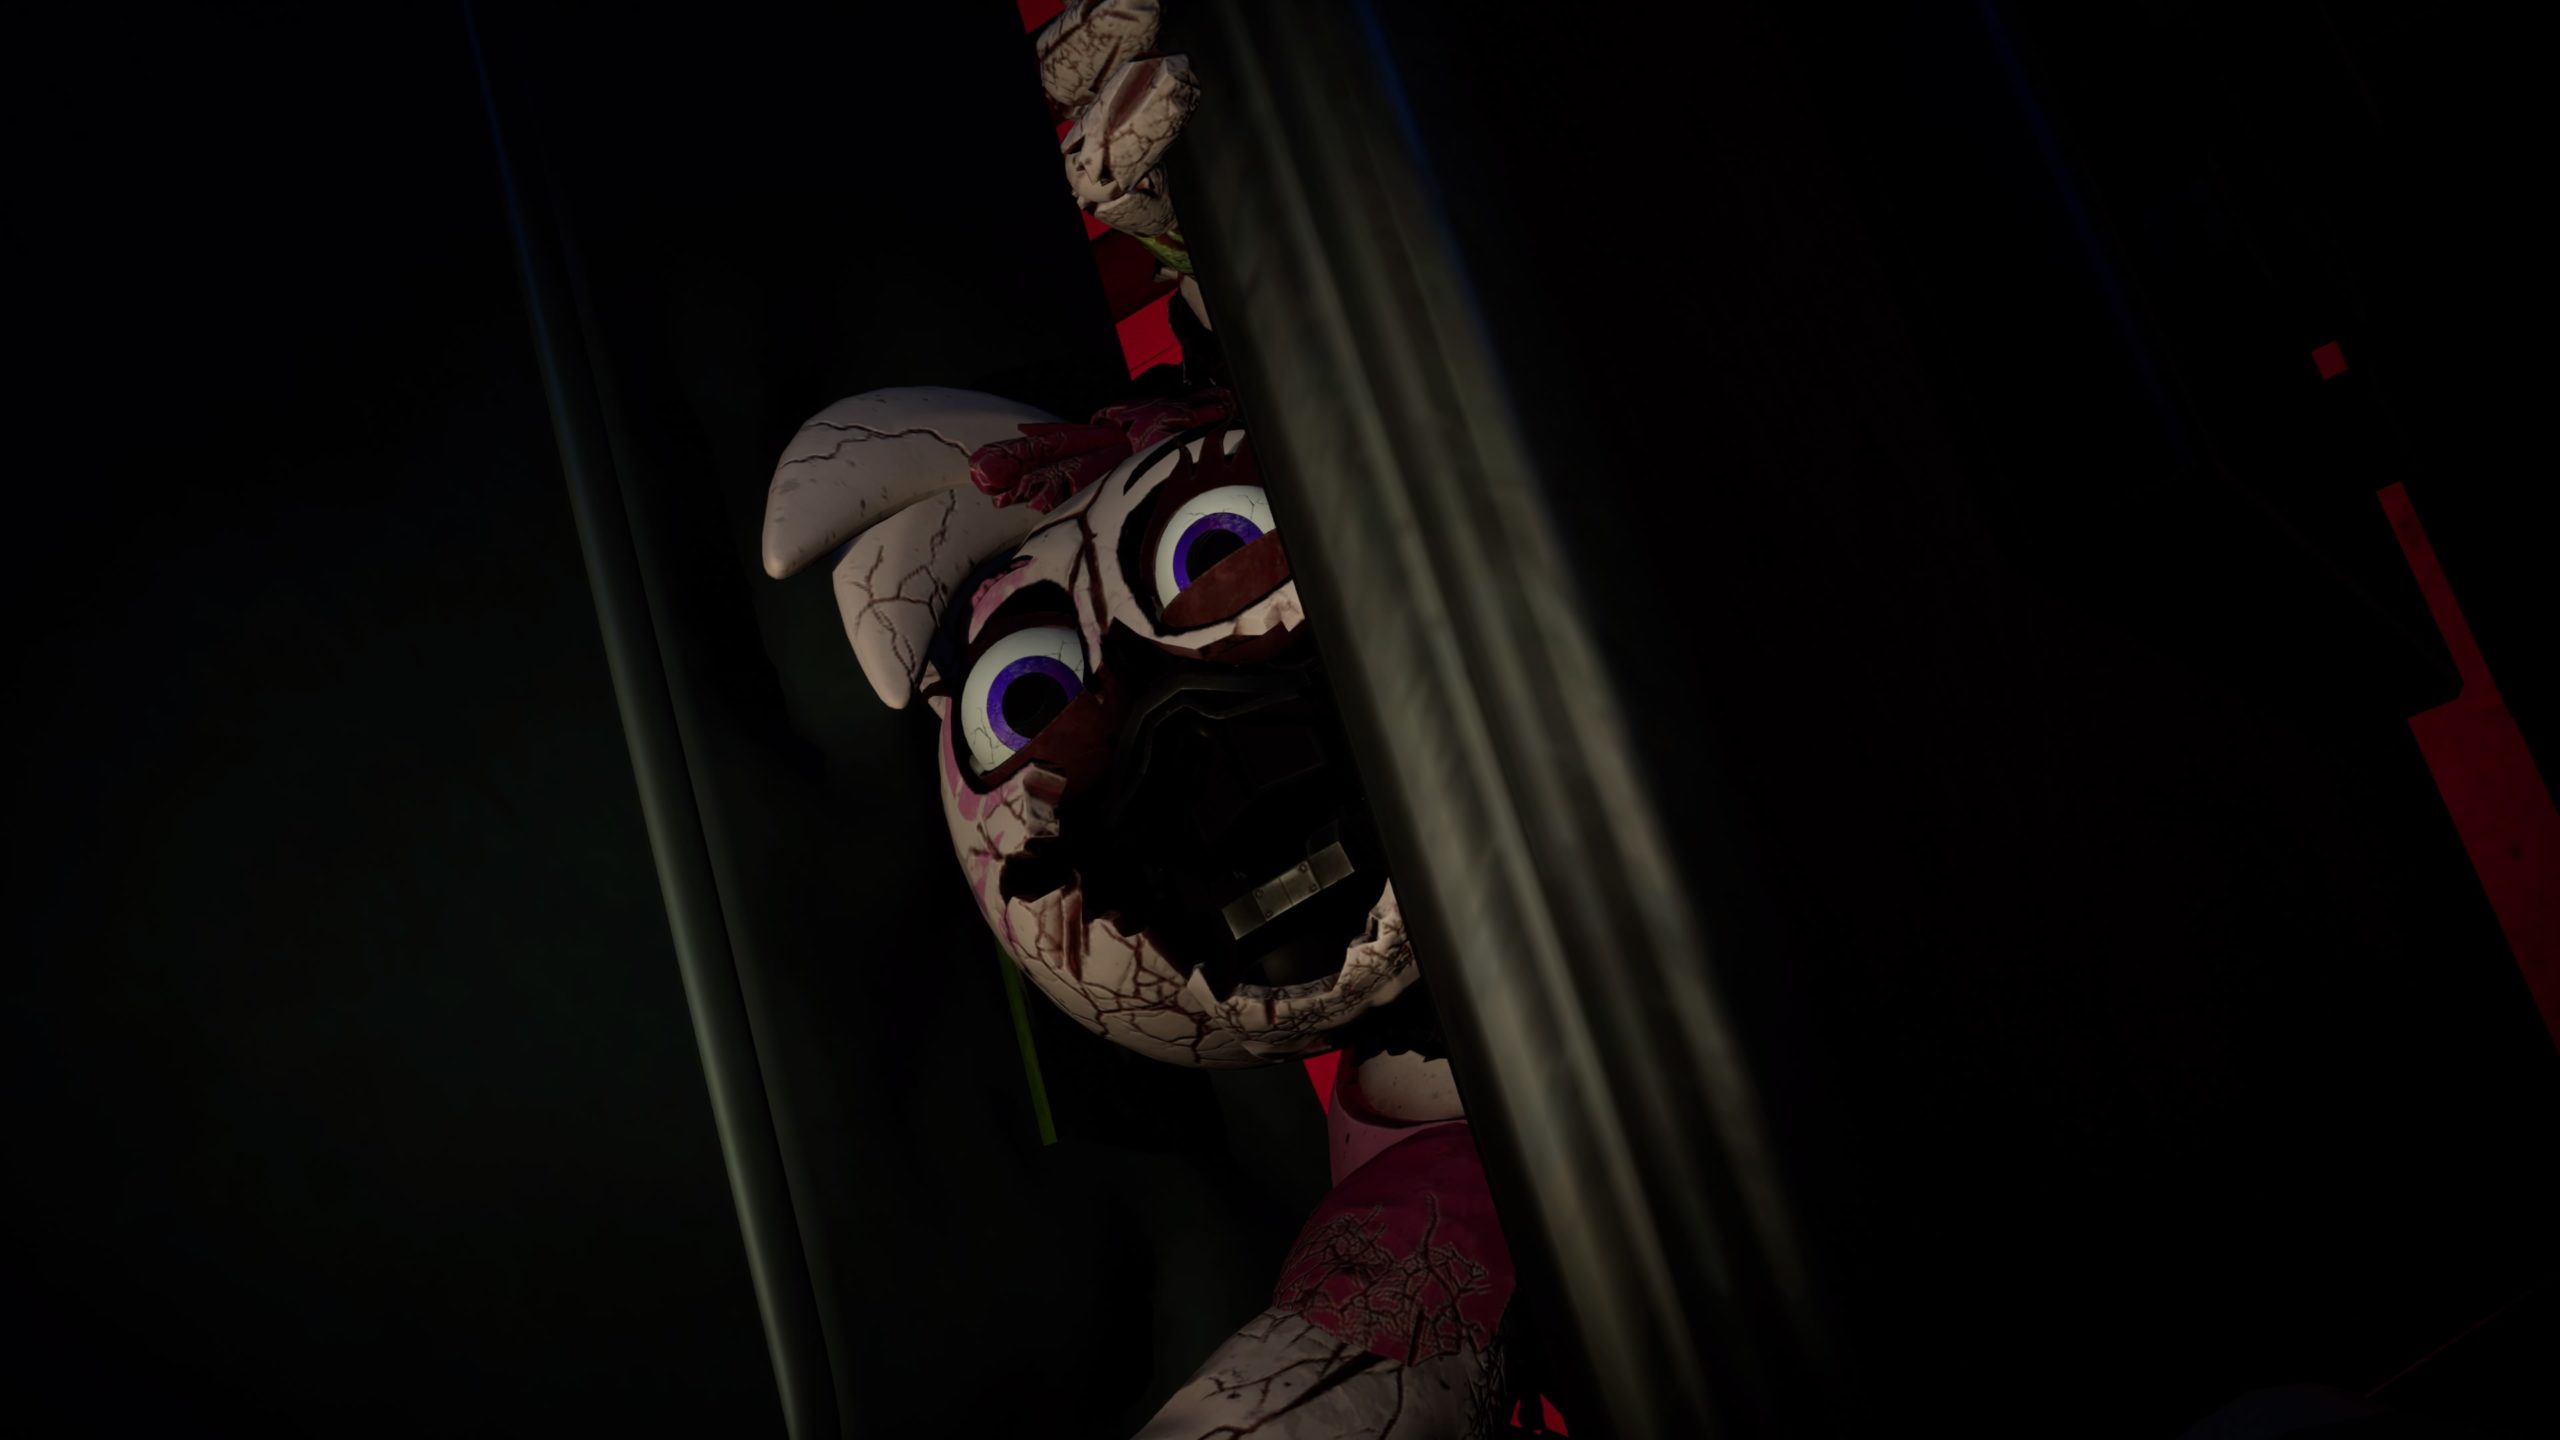 UNSEEN footage of the kitchen camera in Five nights at freddys?! 